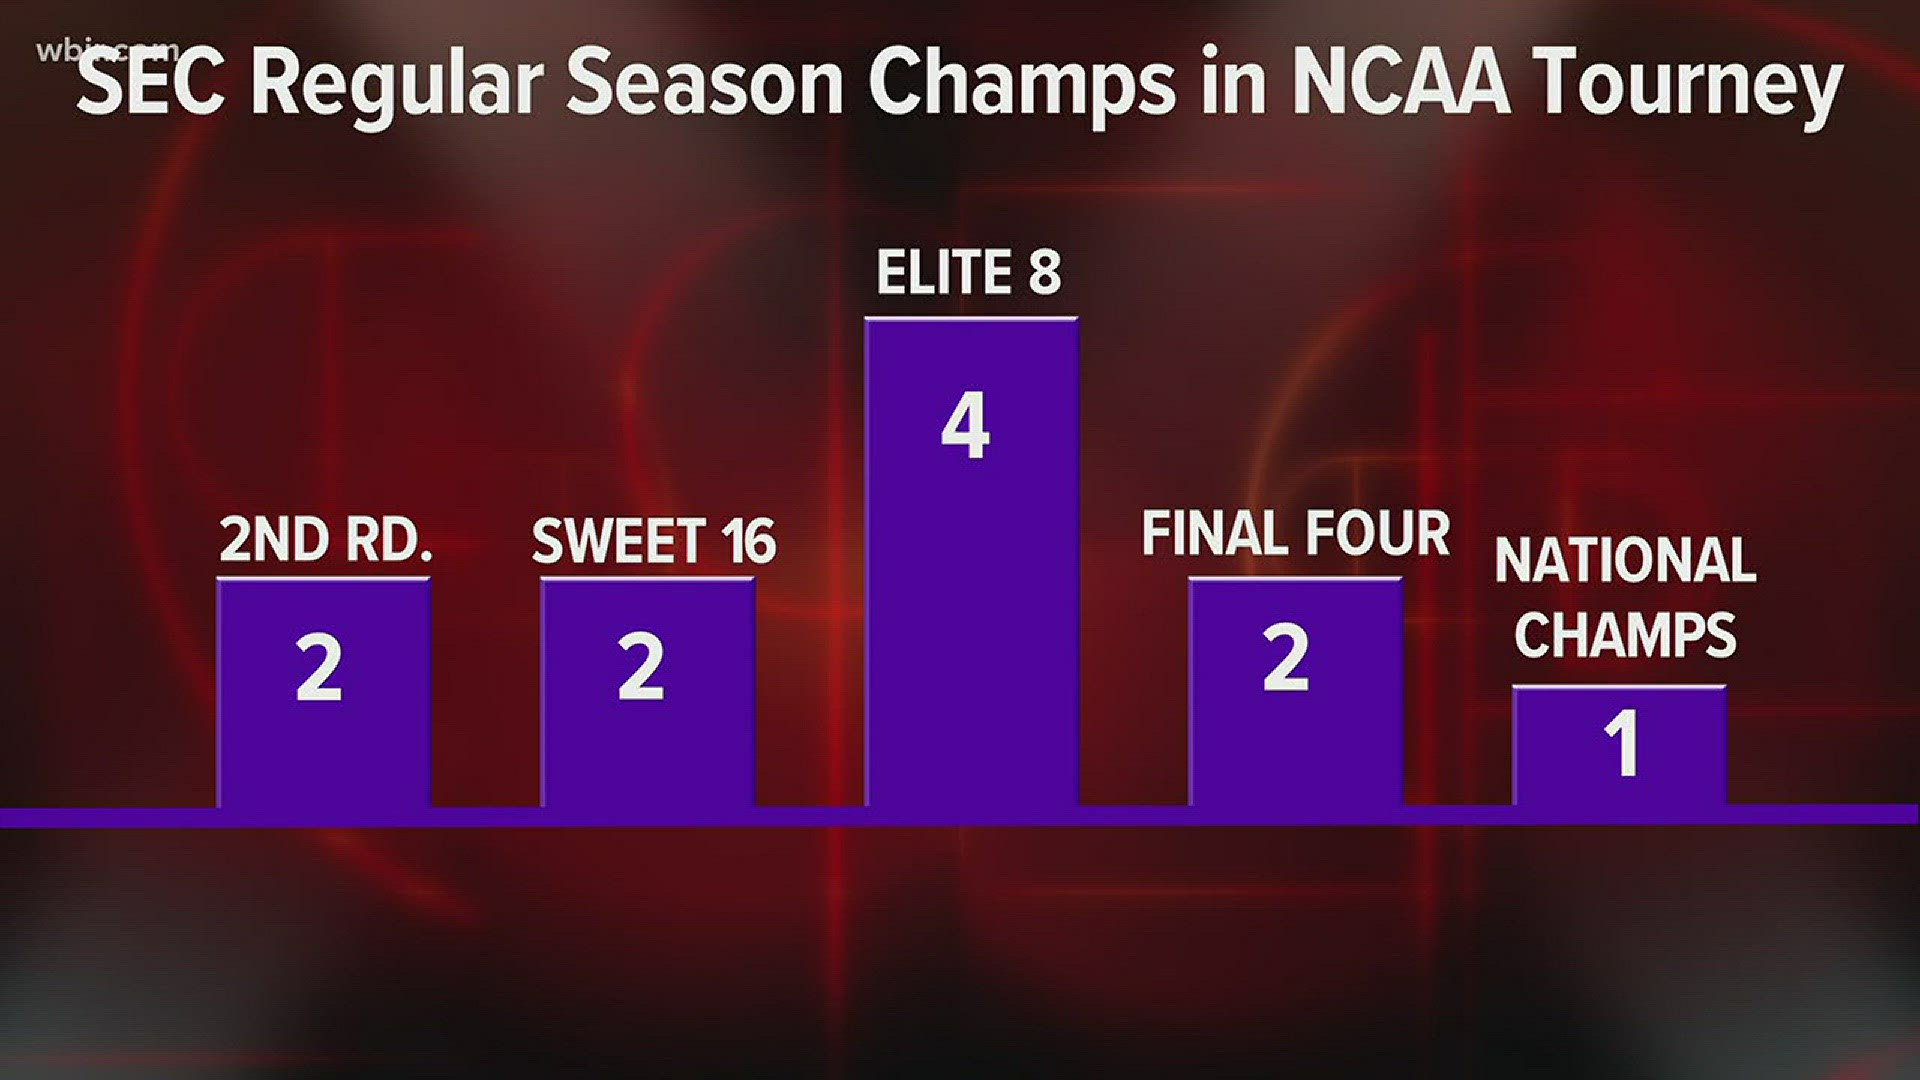 The Vols won a share of the SEC regular season title and WBIR 10Sports Anchor Patrick Murray takes a look at how SEC champs have fared in the conference and NCAA tournaments over the previous ten seasons.